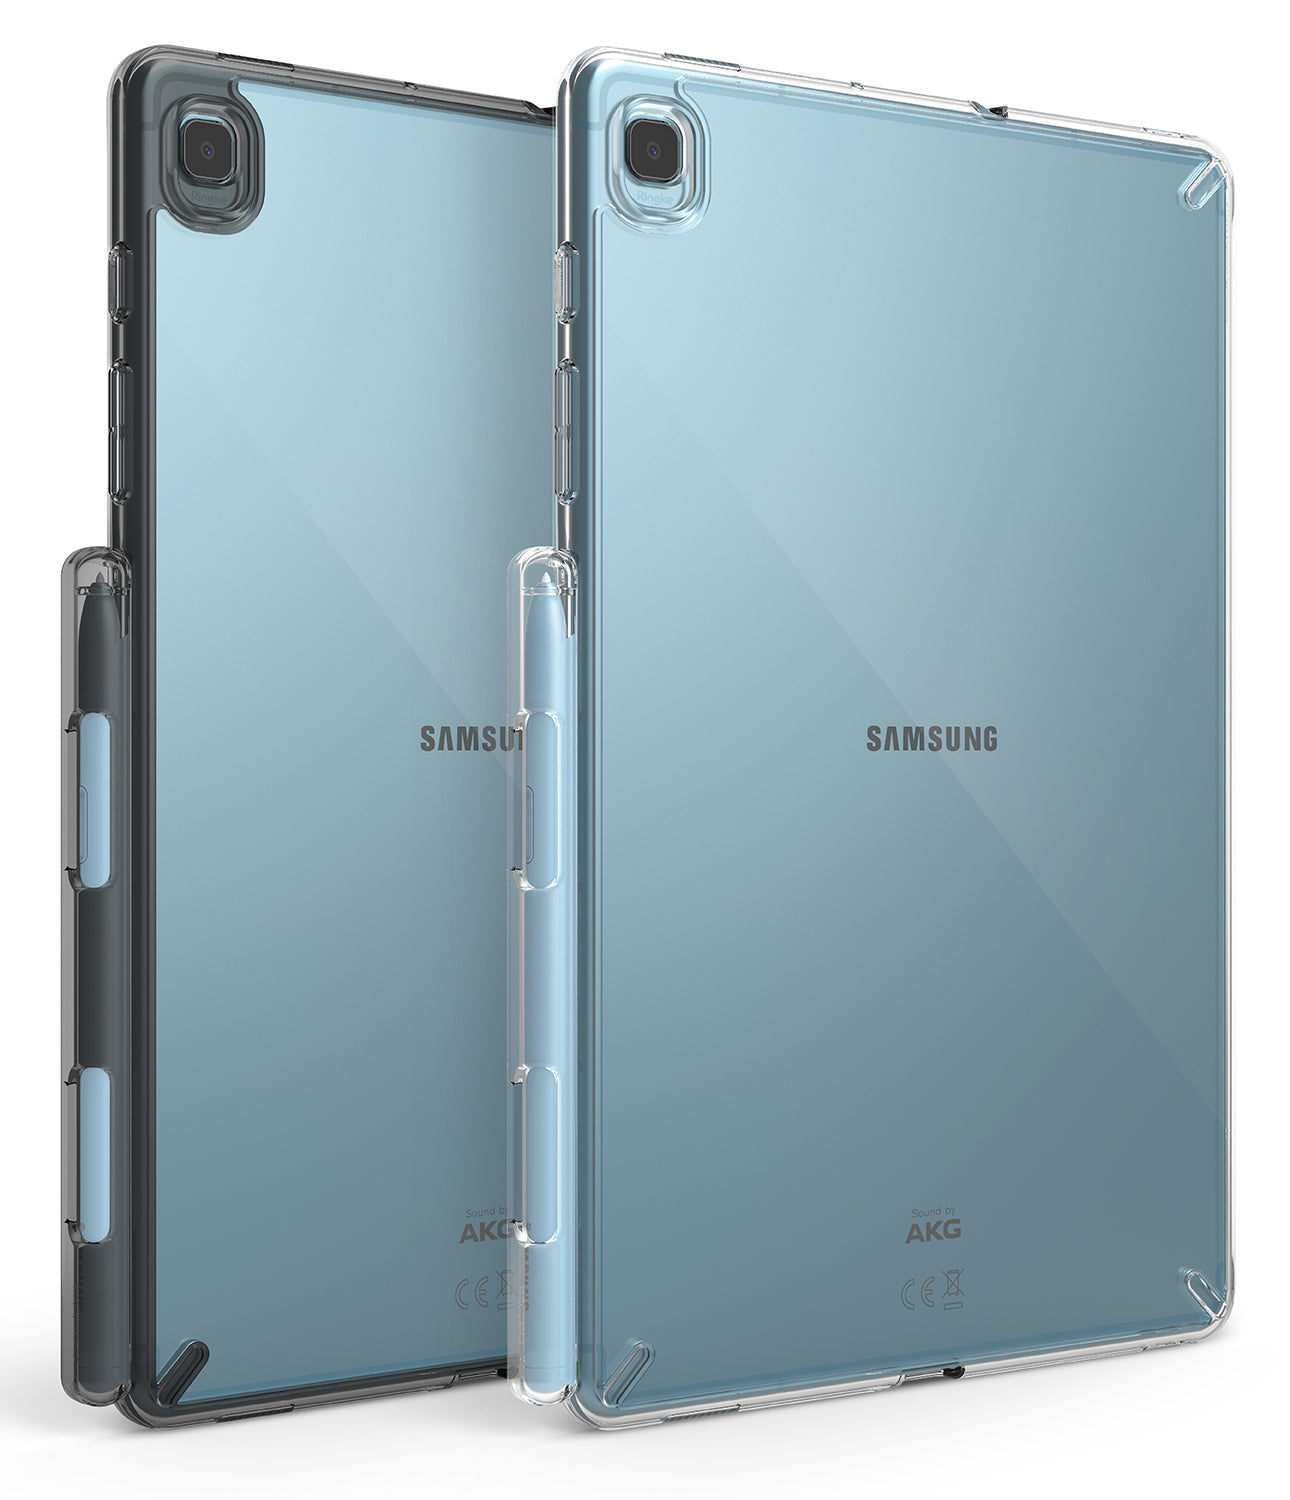 Samsung Tab S6 Lite Case / Protect your Galaxy Tab S6 Lite with one of these sweet ... / Samsung's galaxy tab s6 lite makes a case for android tablets by delivering a premium design, bright display and long battery life for just $350.